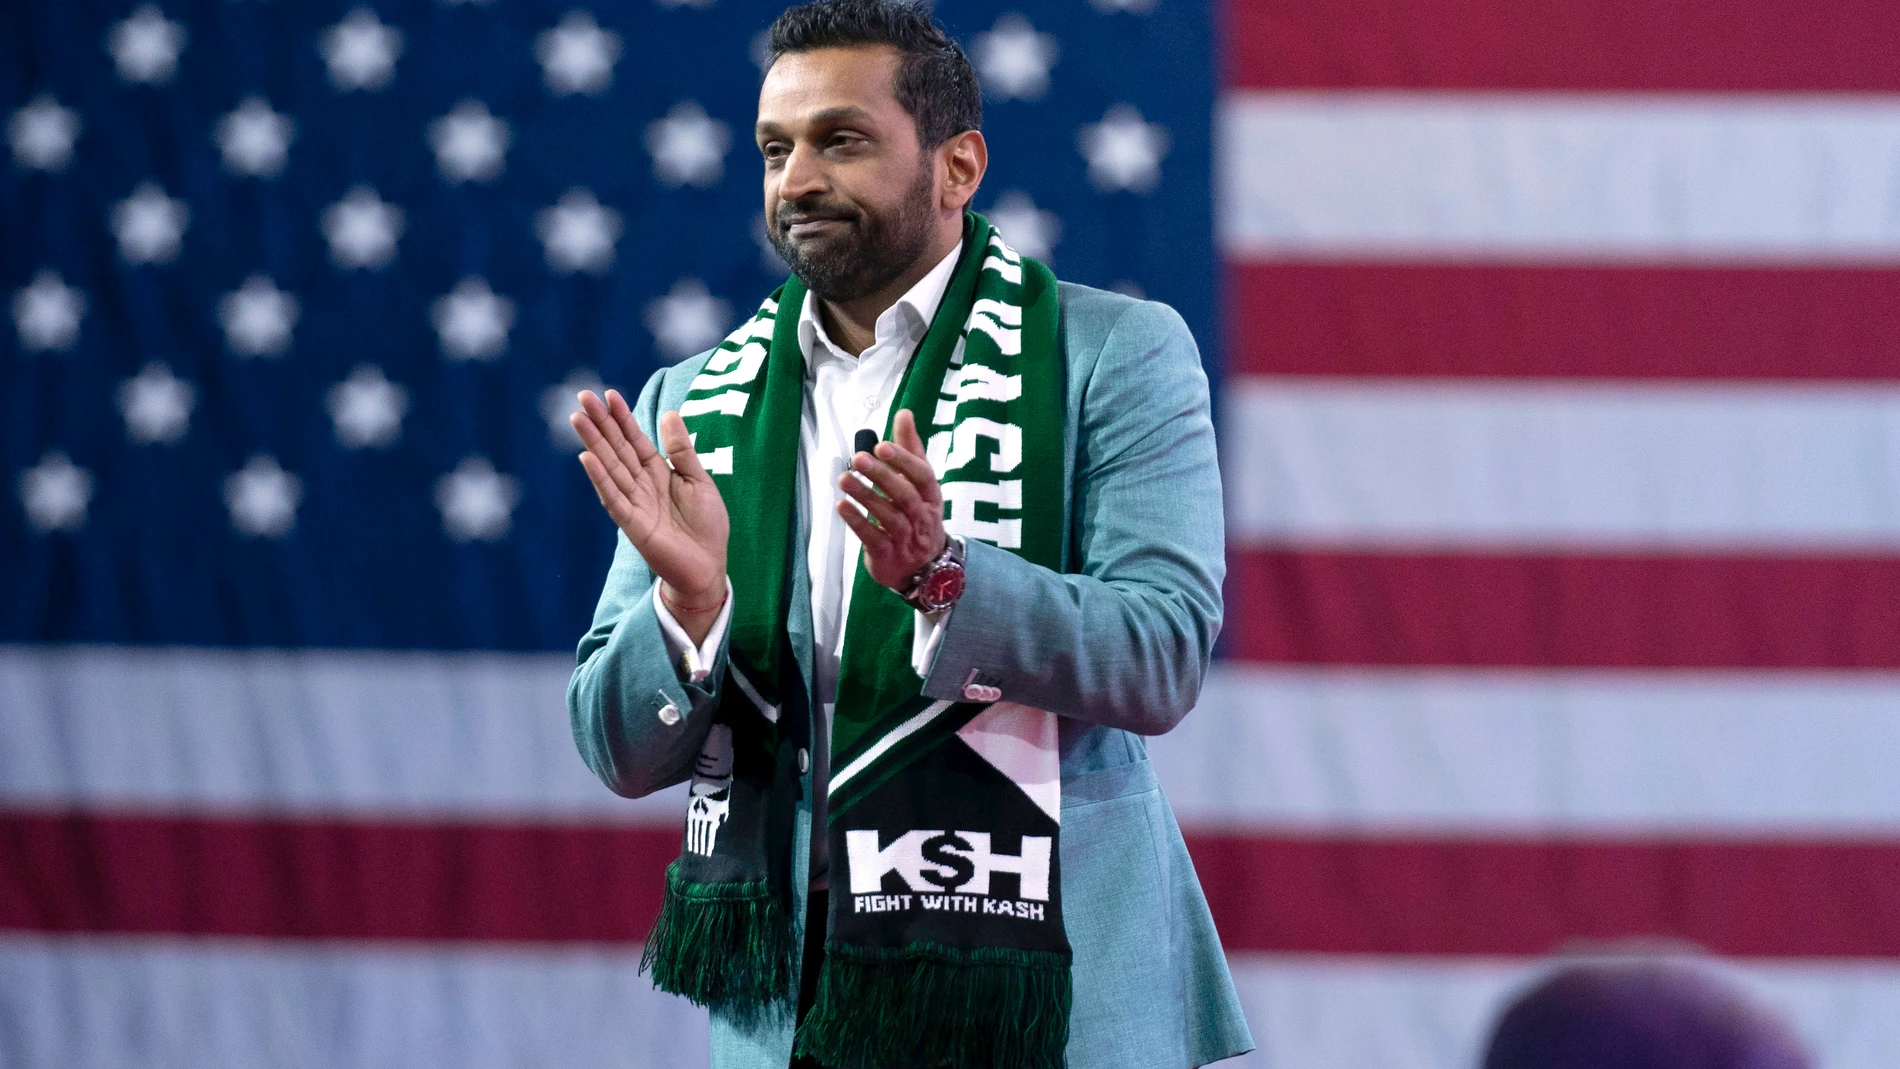 Kash Patel speaks during the Conservative Political Action Conference, CPAC 2024, at the National Harbor in Oxon Hill, Md., Friday , Feb. 23, 2024. (AP Photo/Jose Luis Magana)